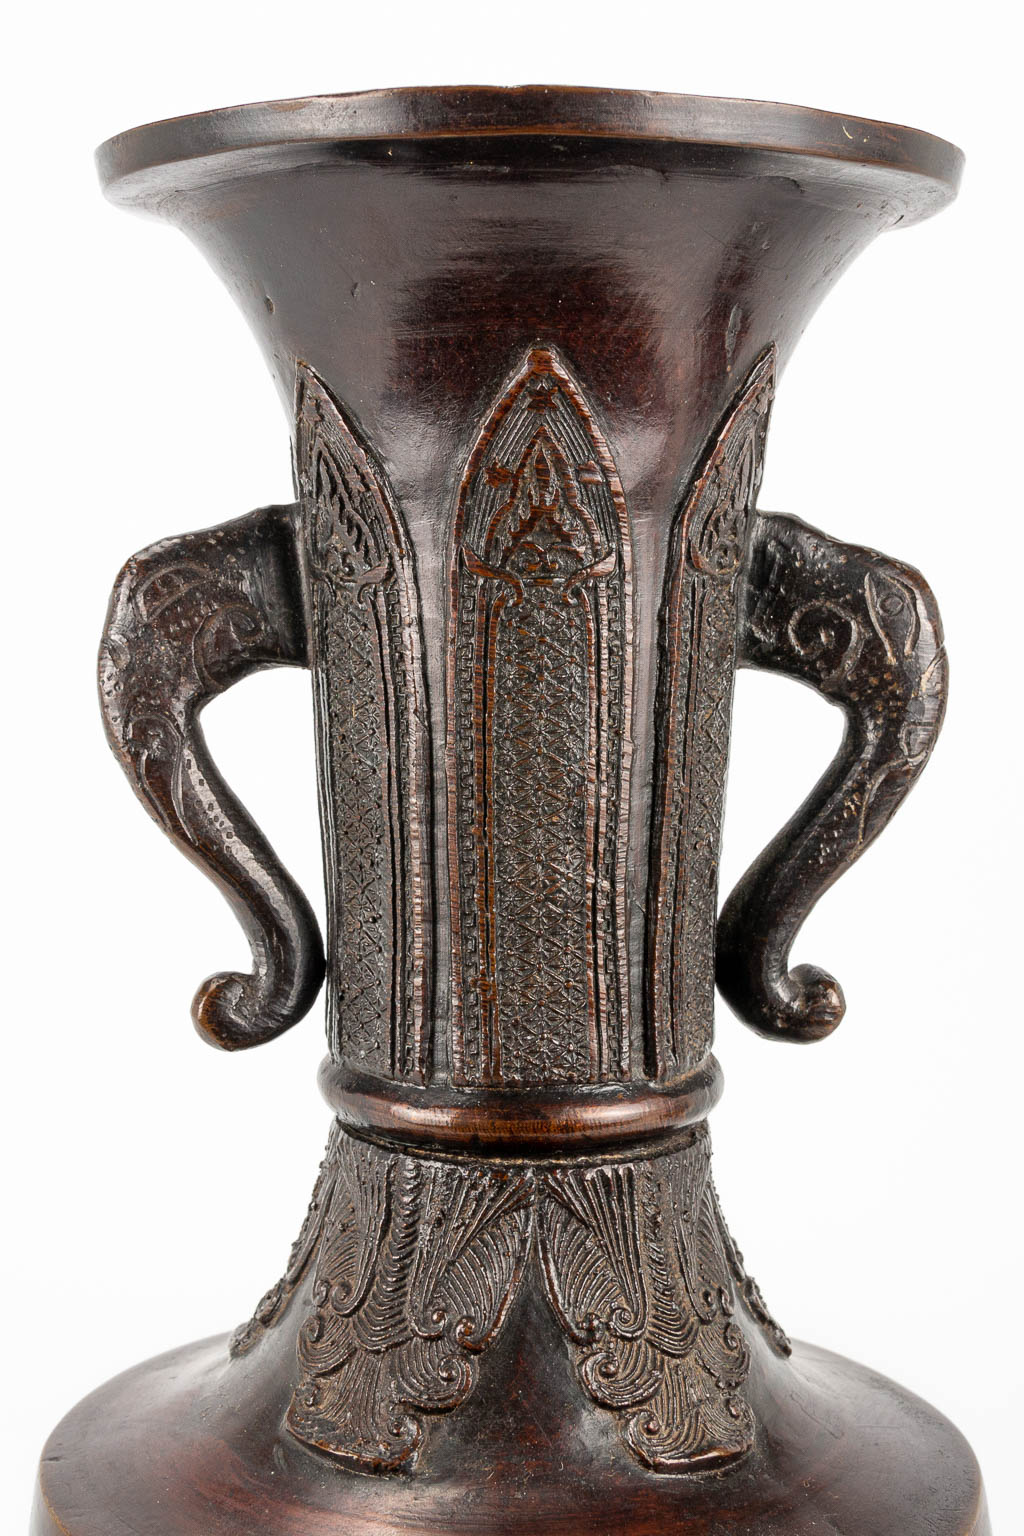 A pair of vases made of bronze with bird decor, Japan Meiji, 19th century. (30 x 12,5 cm) - Image 17 of 19